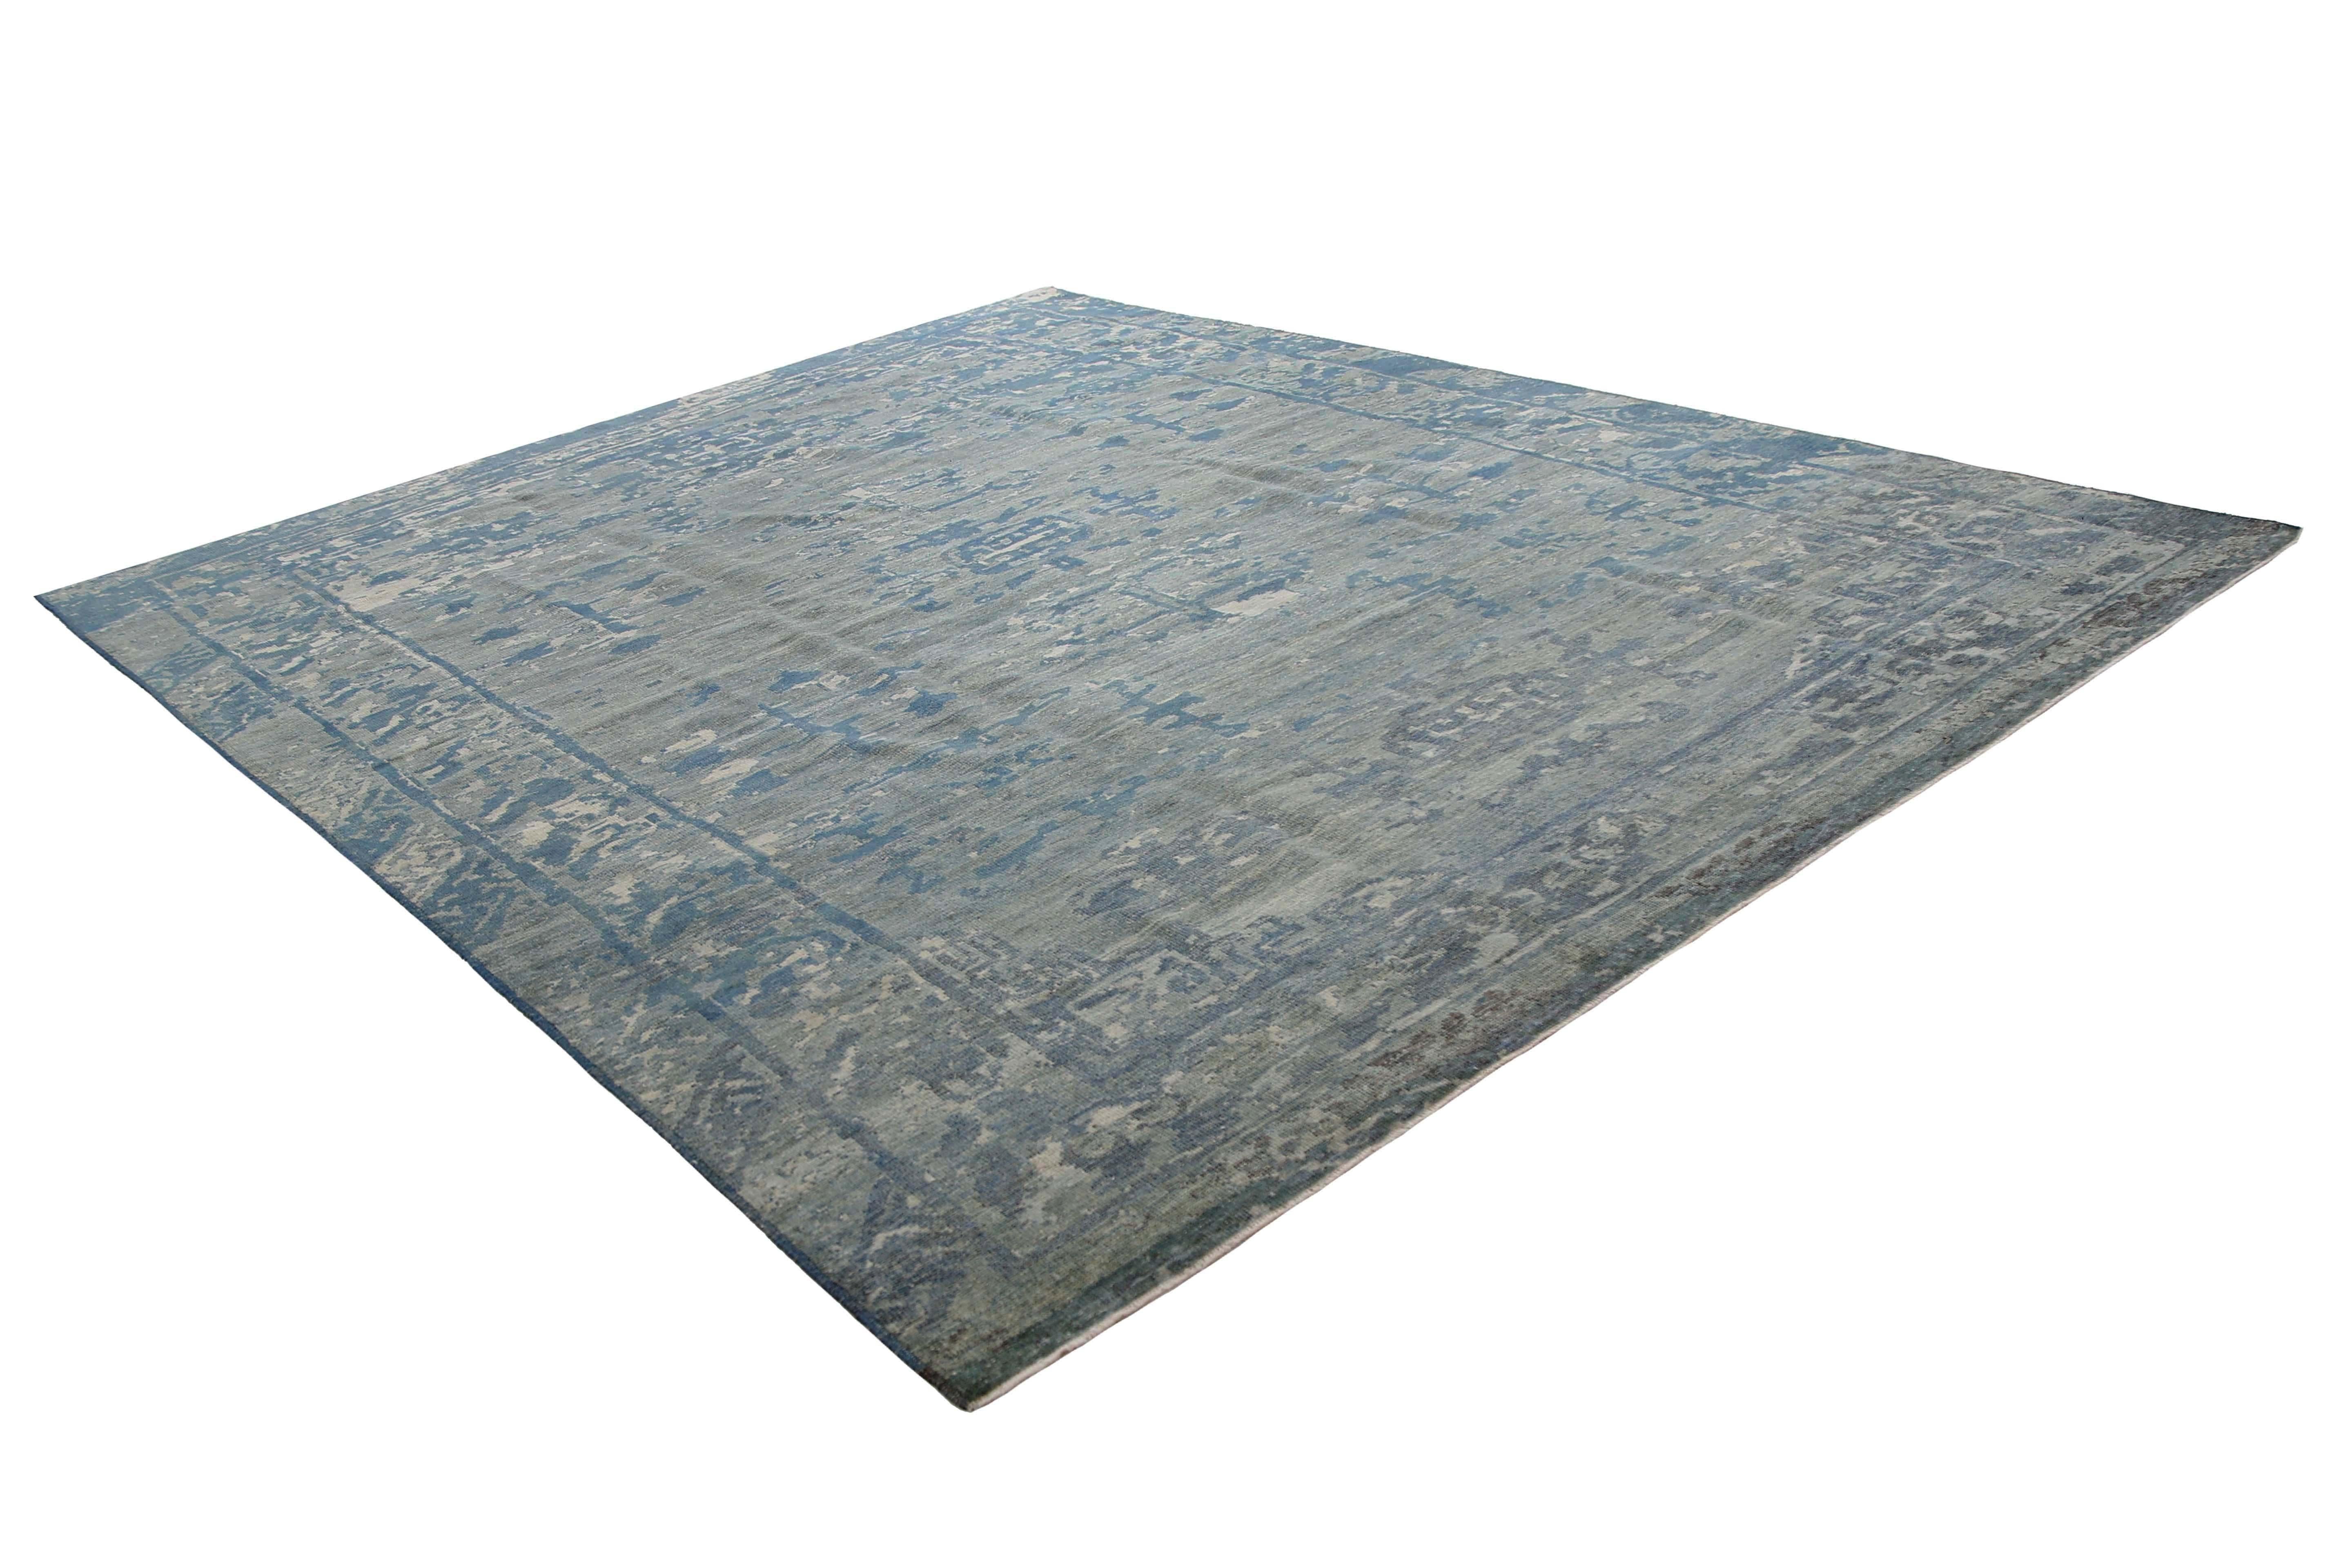 Wool Exquisite Handmade Sultanabad Rug For Sale